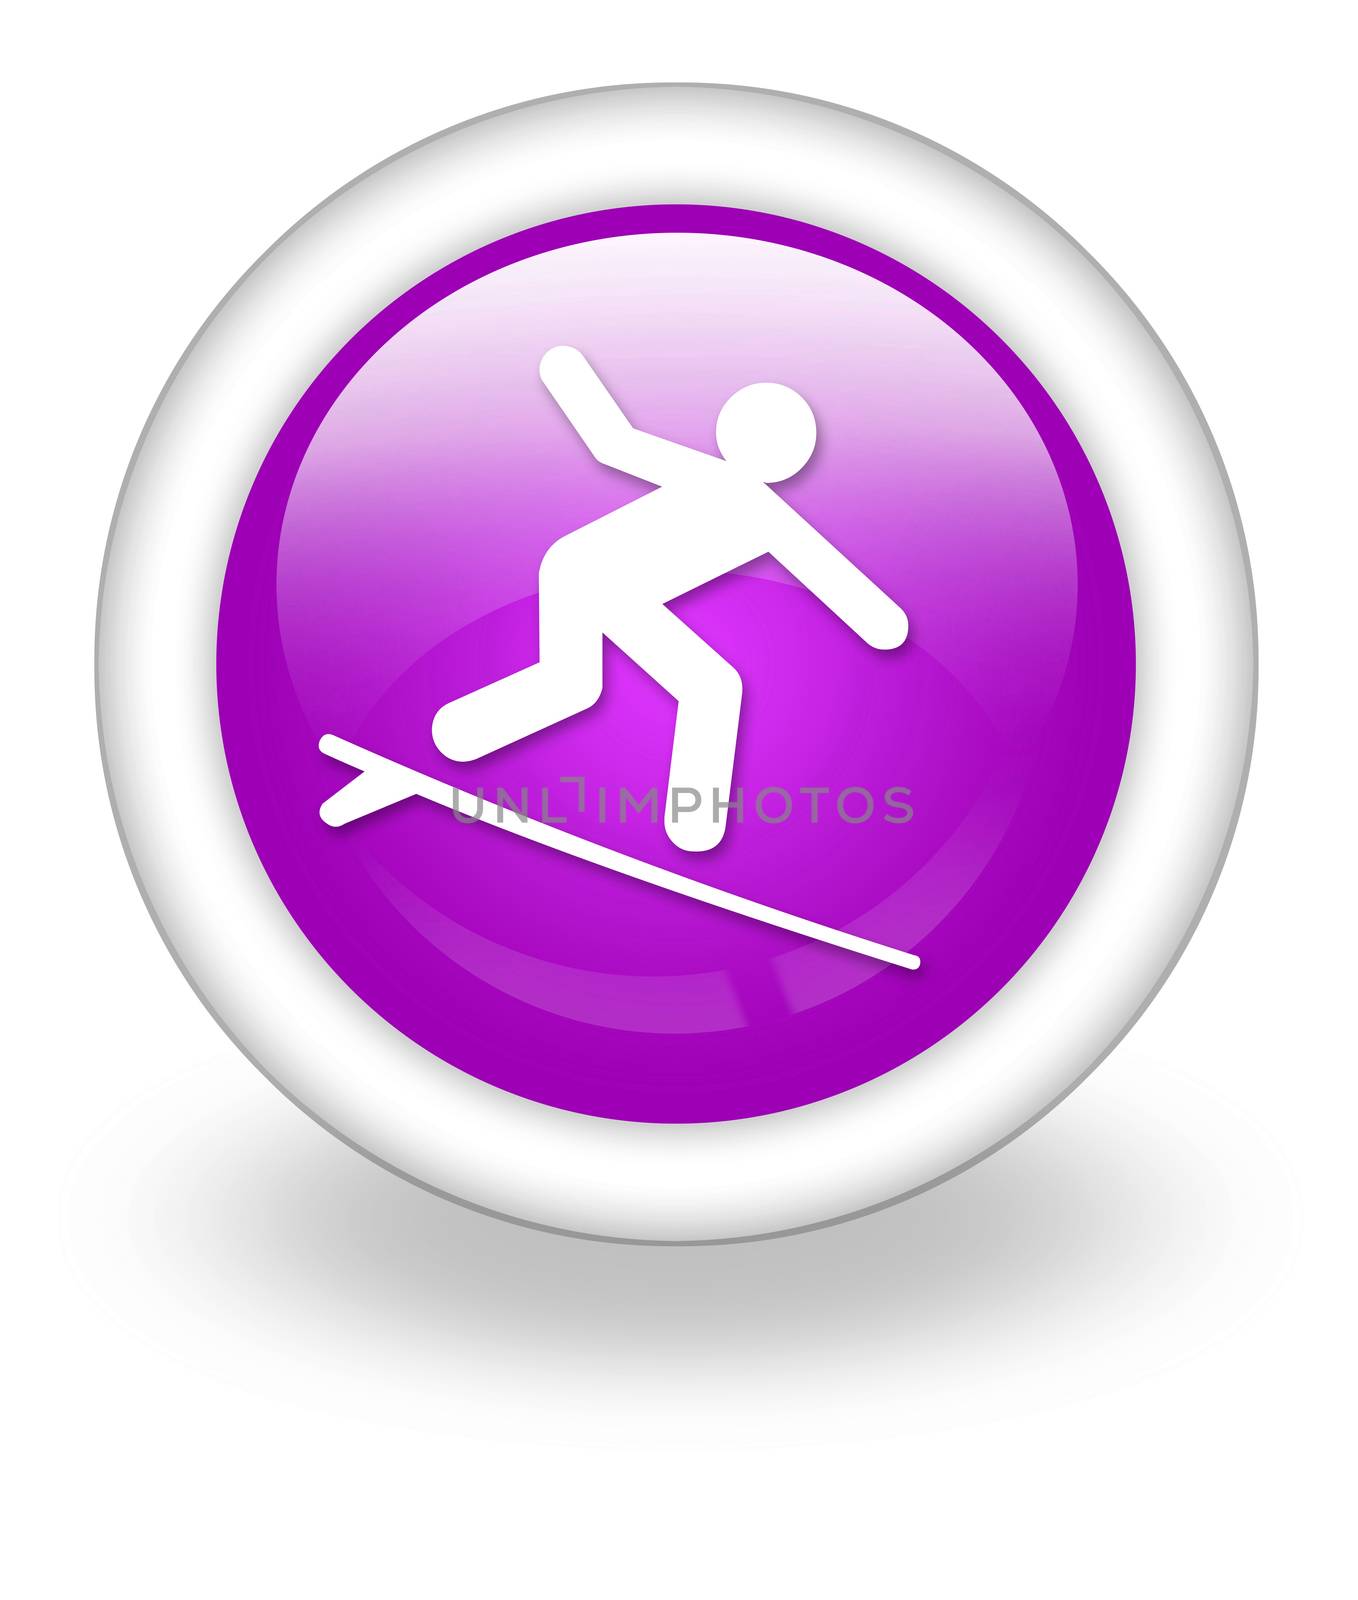 Icon, Button, Pictogram with Surfing symbol